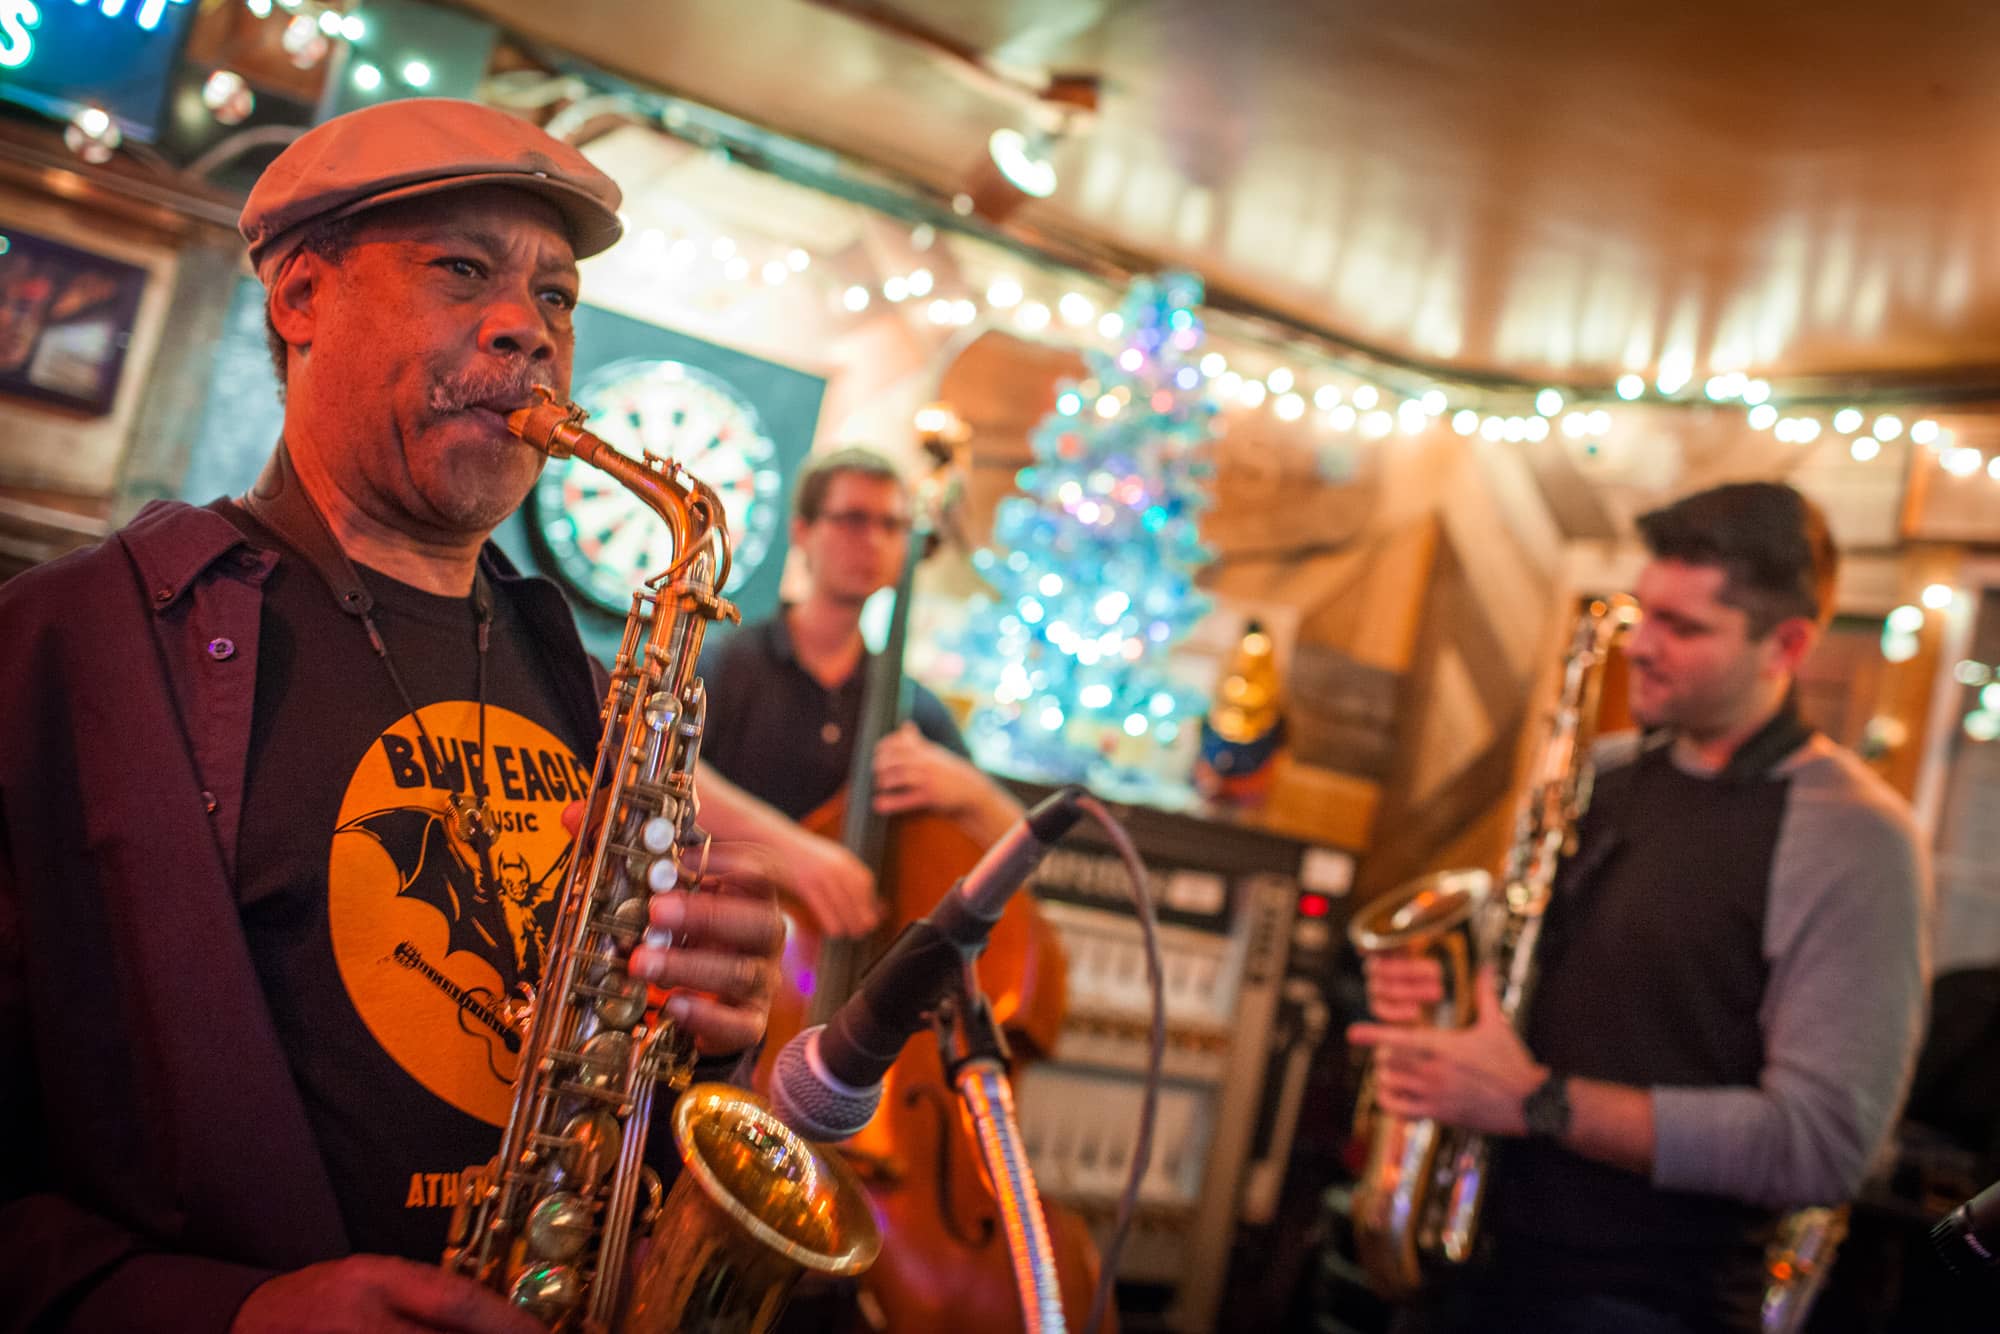 Photograph of the Word of Mouth band playing at Tony's Tavern on Dec. 15, 2015. They play every Tuesday night which is now being called "Jazz Night" by locals.